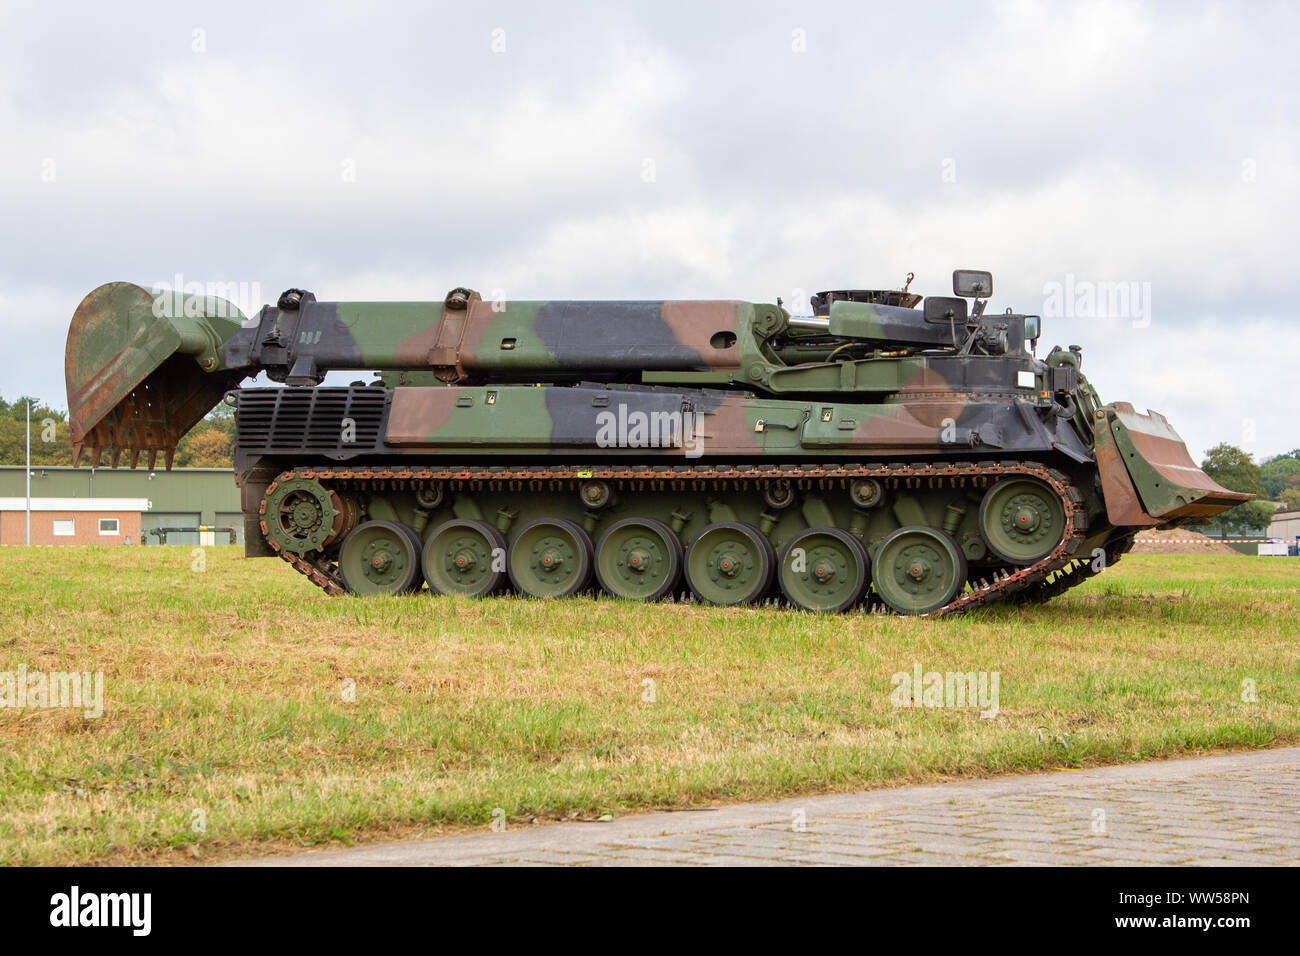 Military armored tank dozer from german army Stock Photo